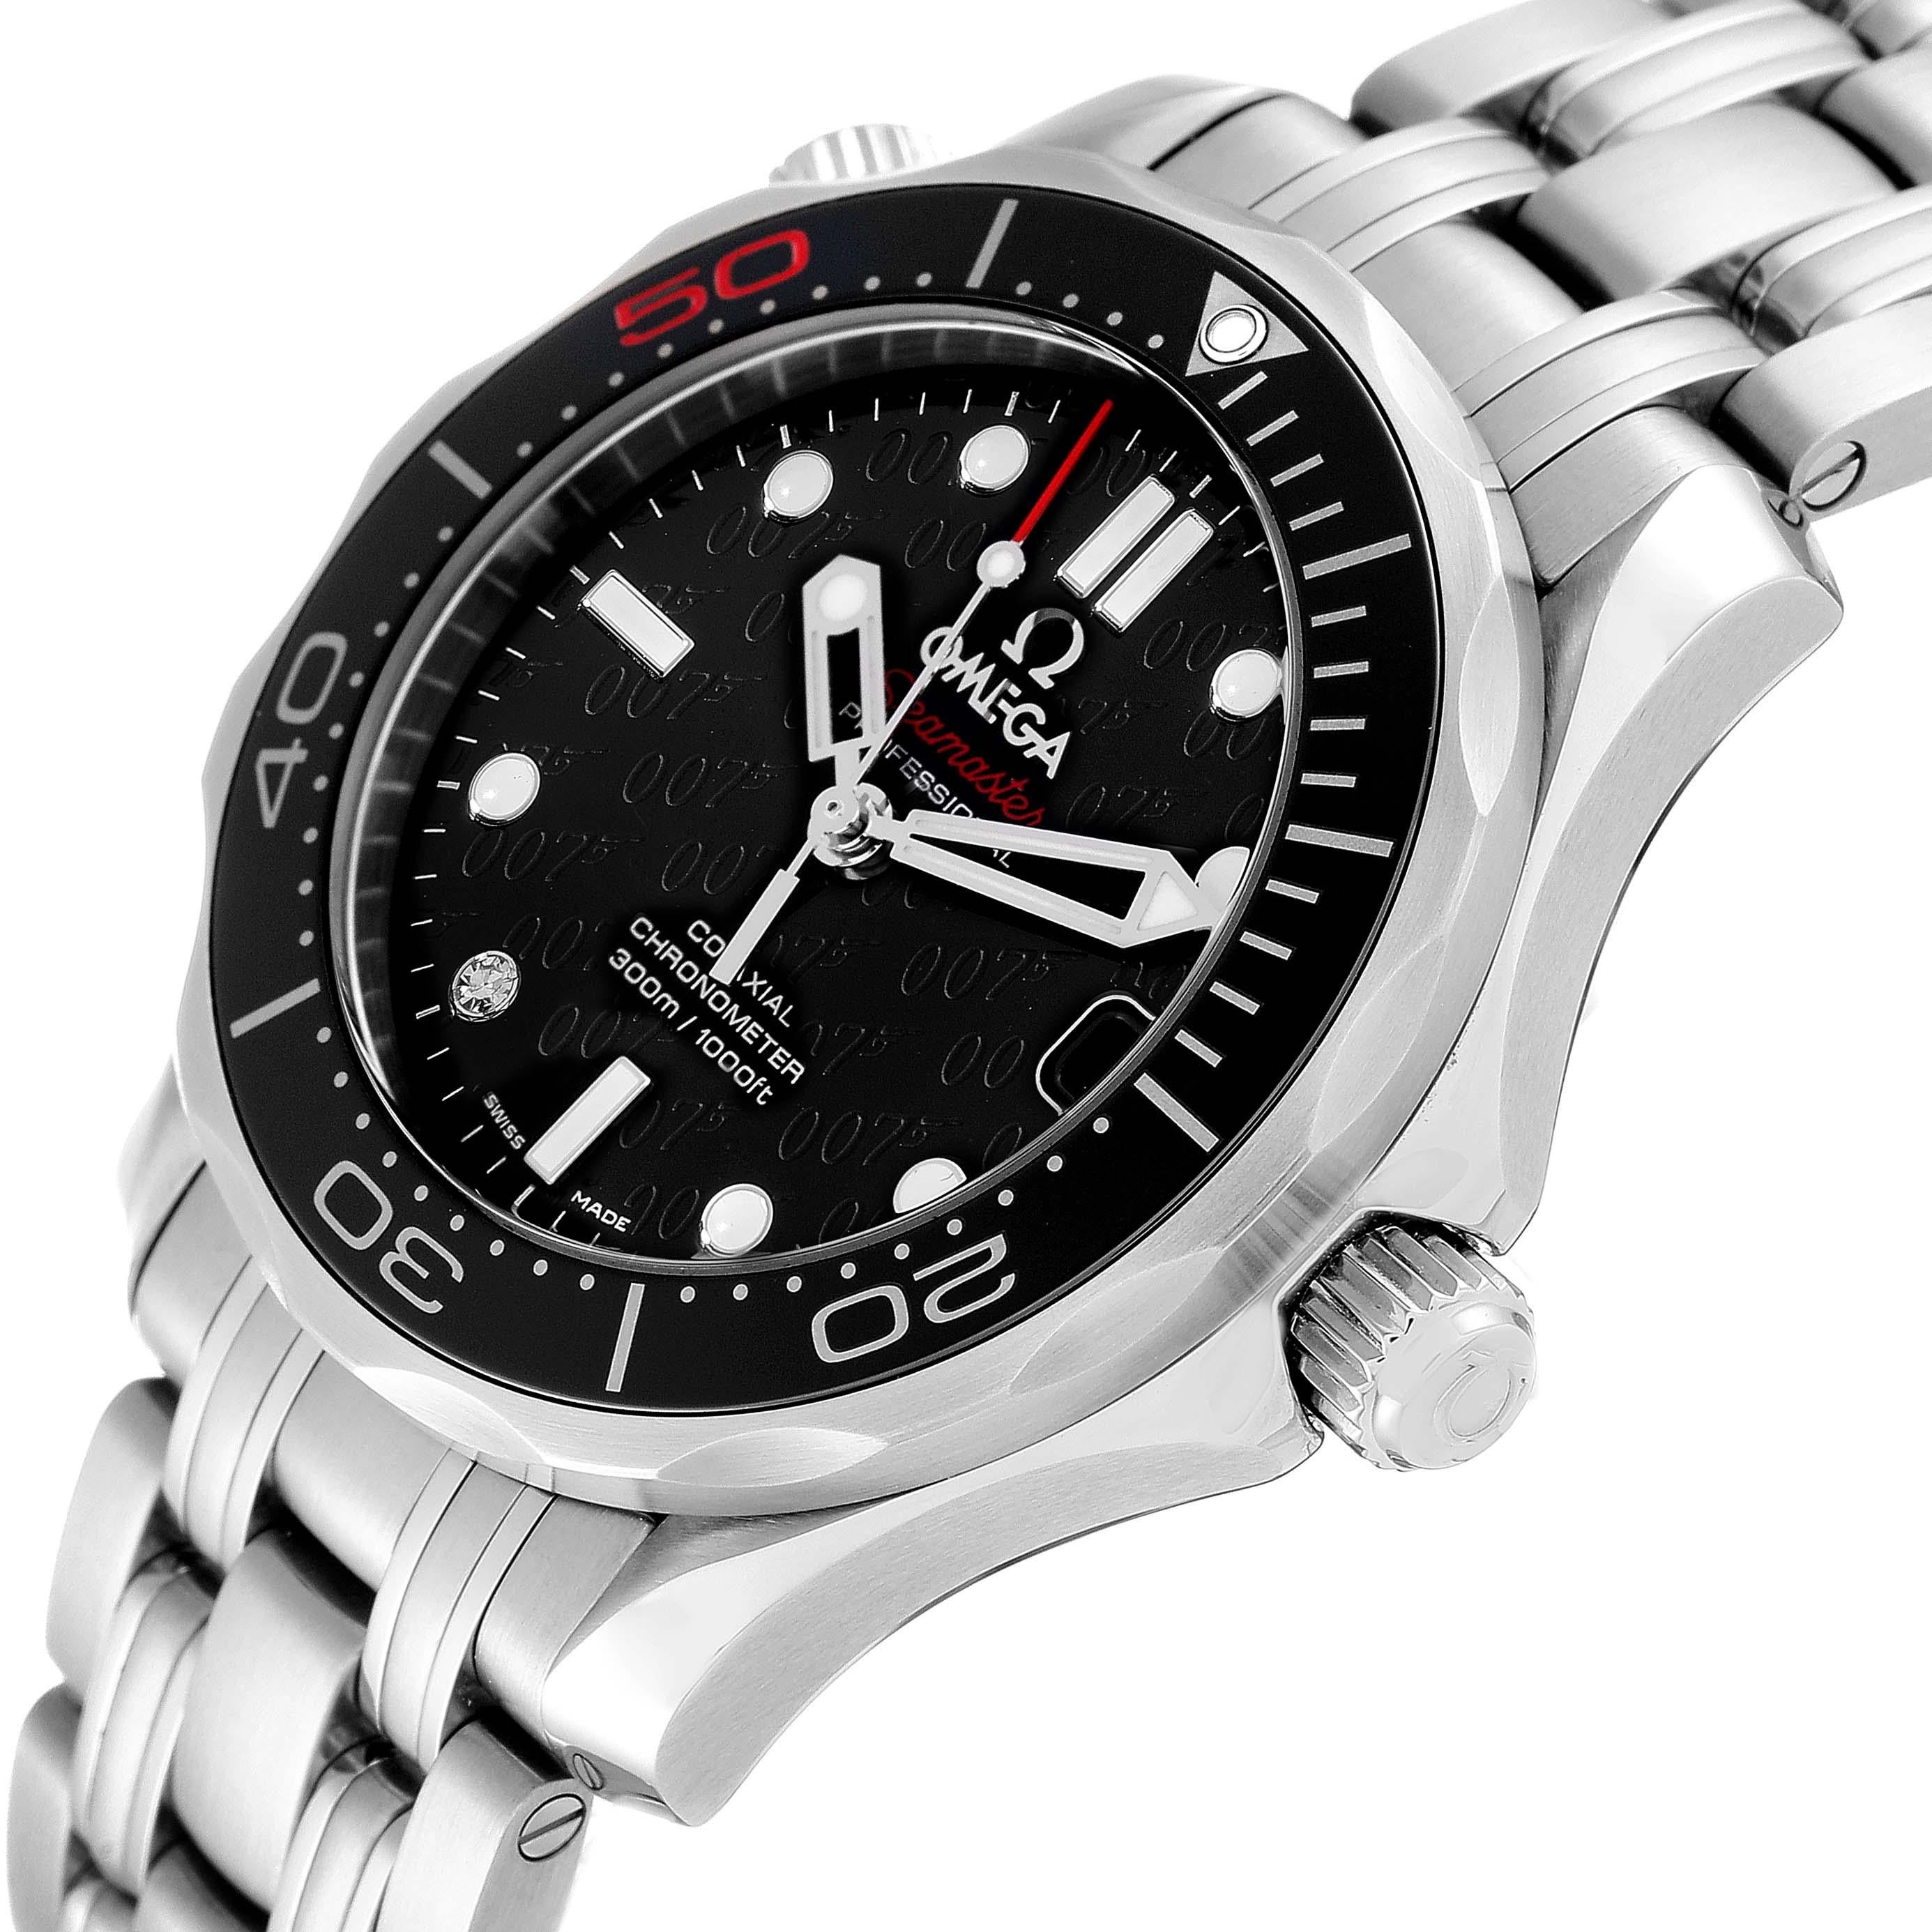 Omega Seamaster Midsize James Bond Limited Edition Mens Watch 212.30.36.20.51.001 Box Card. Automatic self-winding Co-Axial Escapement movement with rhodium-plated finish. Power reserve: 48 hours. Caliber 2507. Stainless steel case 36.25 mm in